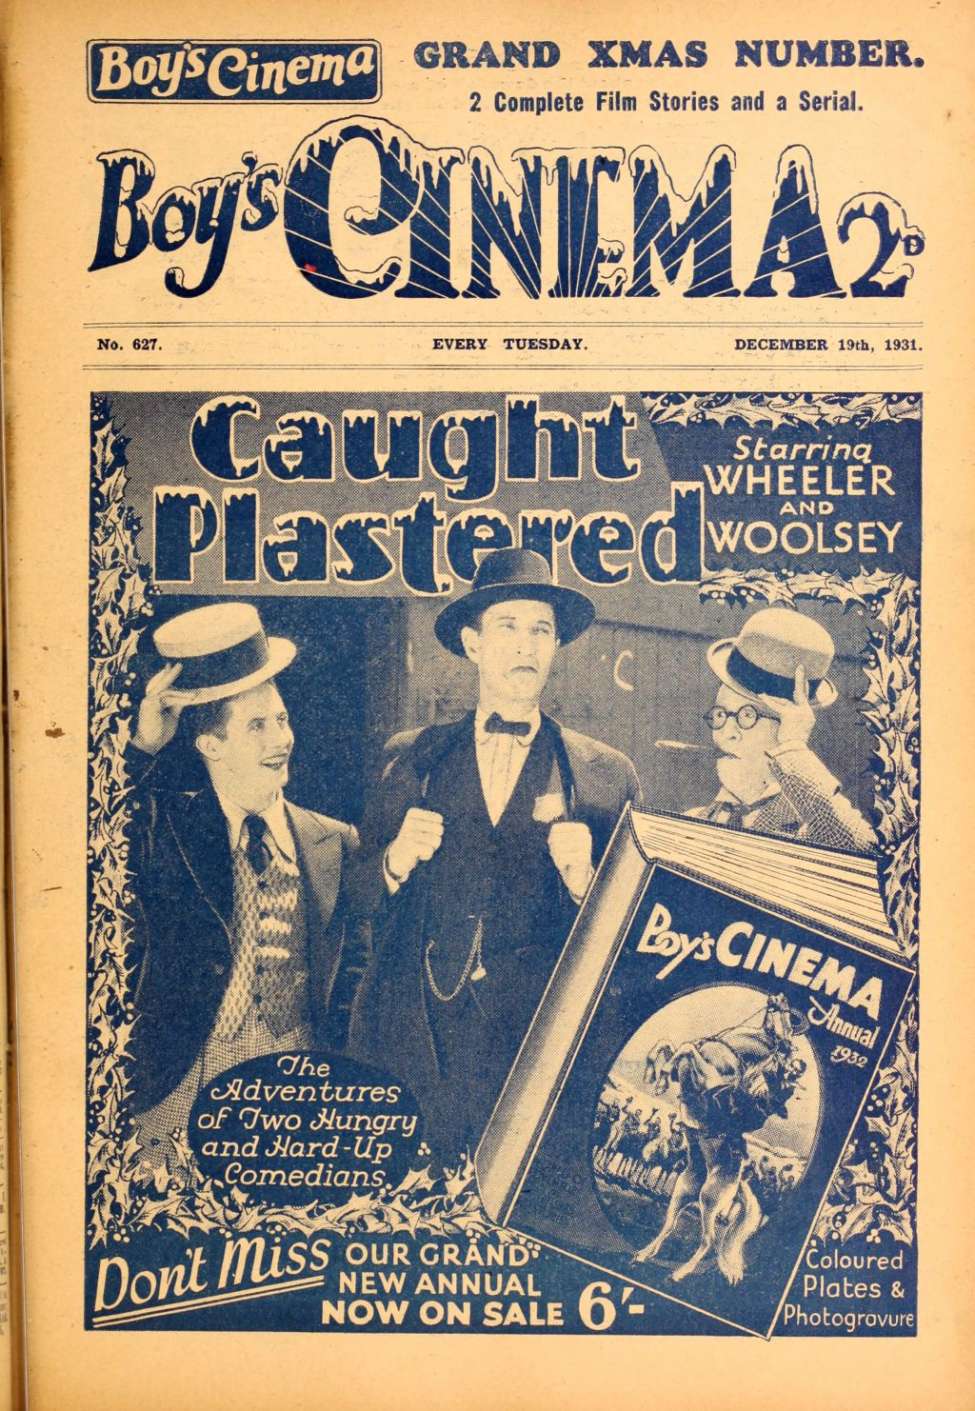 Book Cover For Boy's Cinema 627 - Caught Plastered - Wheeler & Woolsey